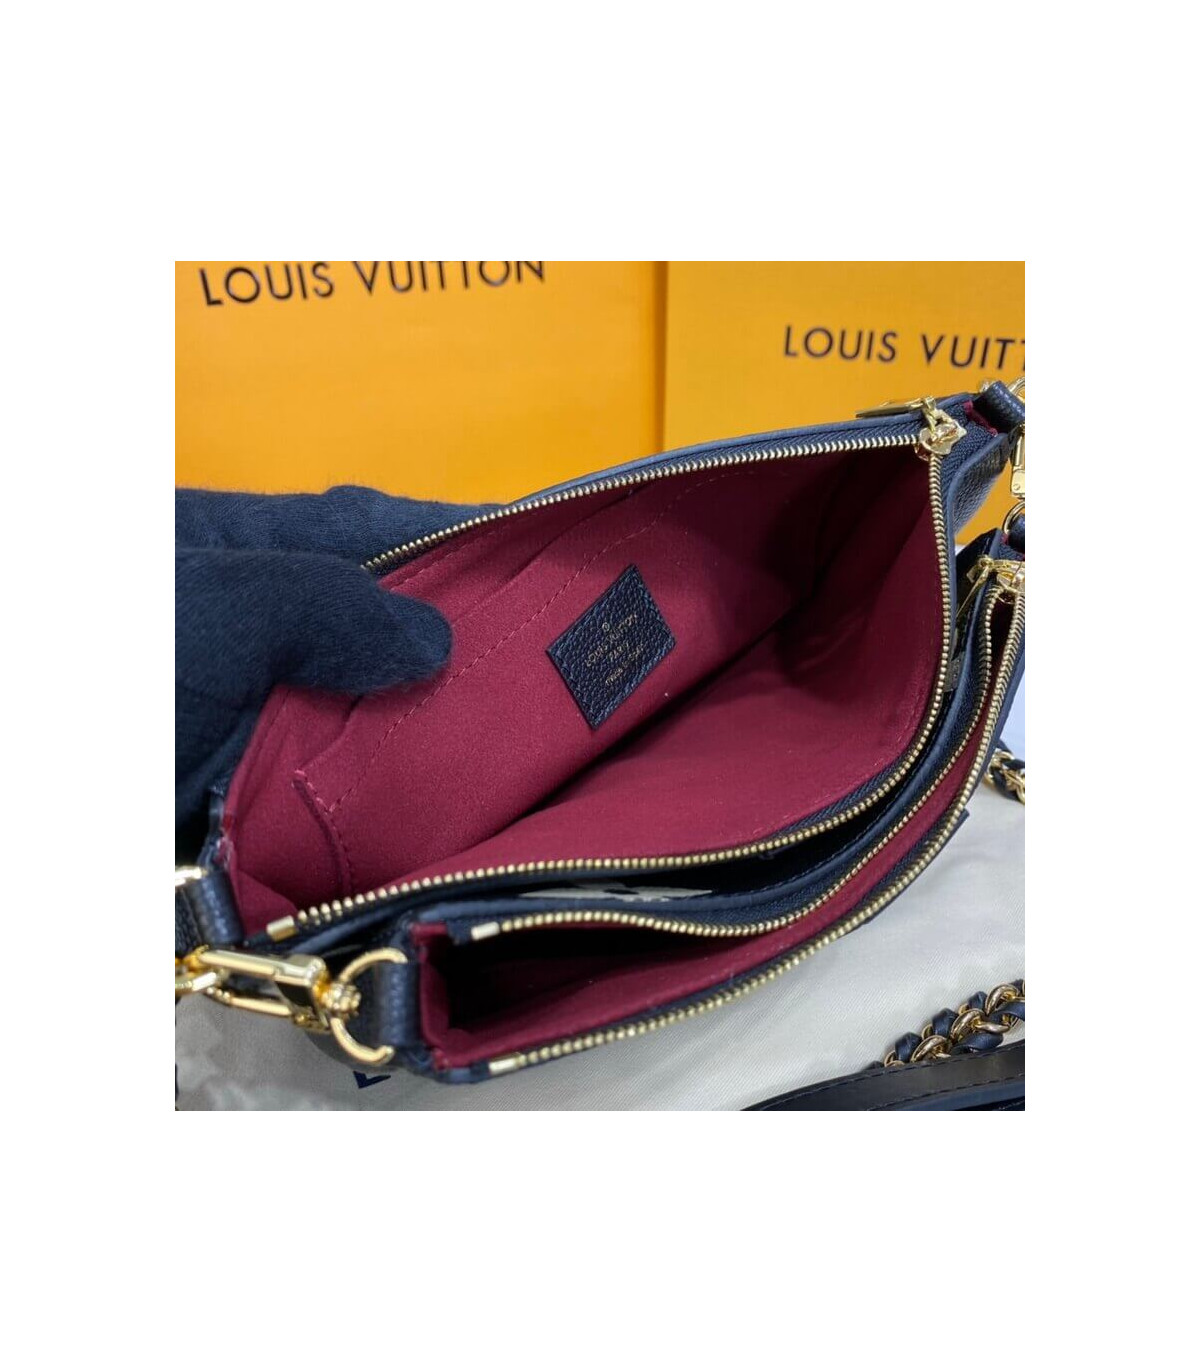 LOUIS VUITTON MULTI POCHETTE ACCESSOIRES REVIEW, 3 Ways To Style, Ogbags  ru